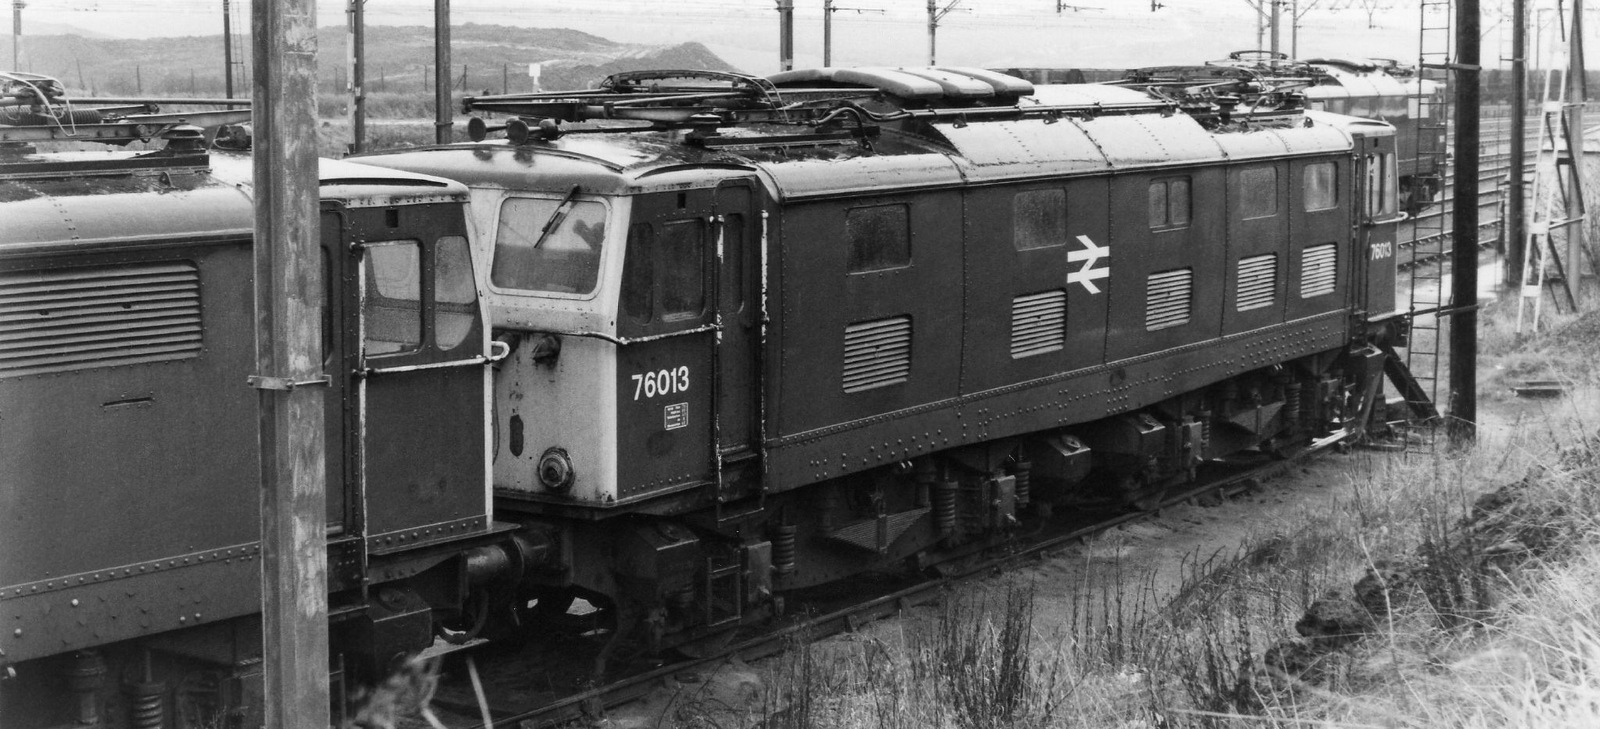 76013 in February 1980 in front of another class 76 loco at Orgreave